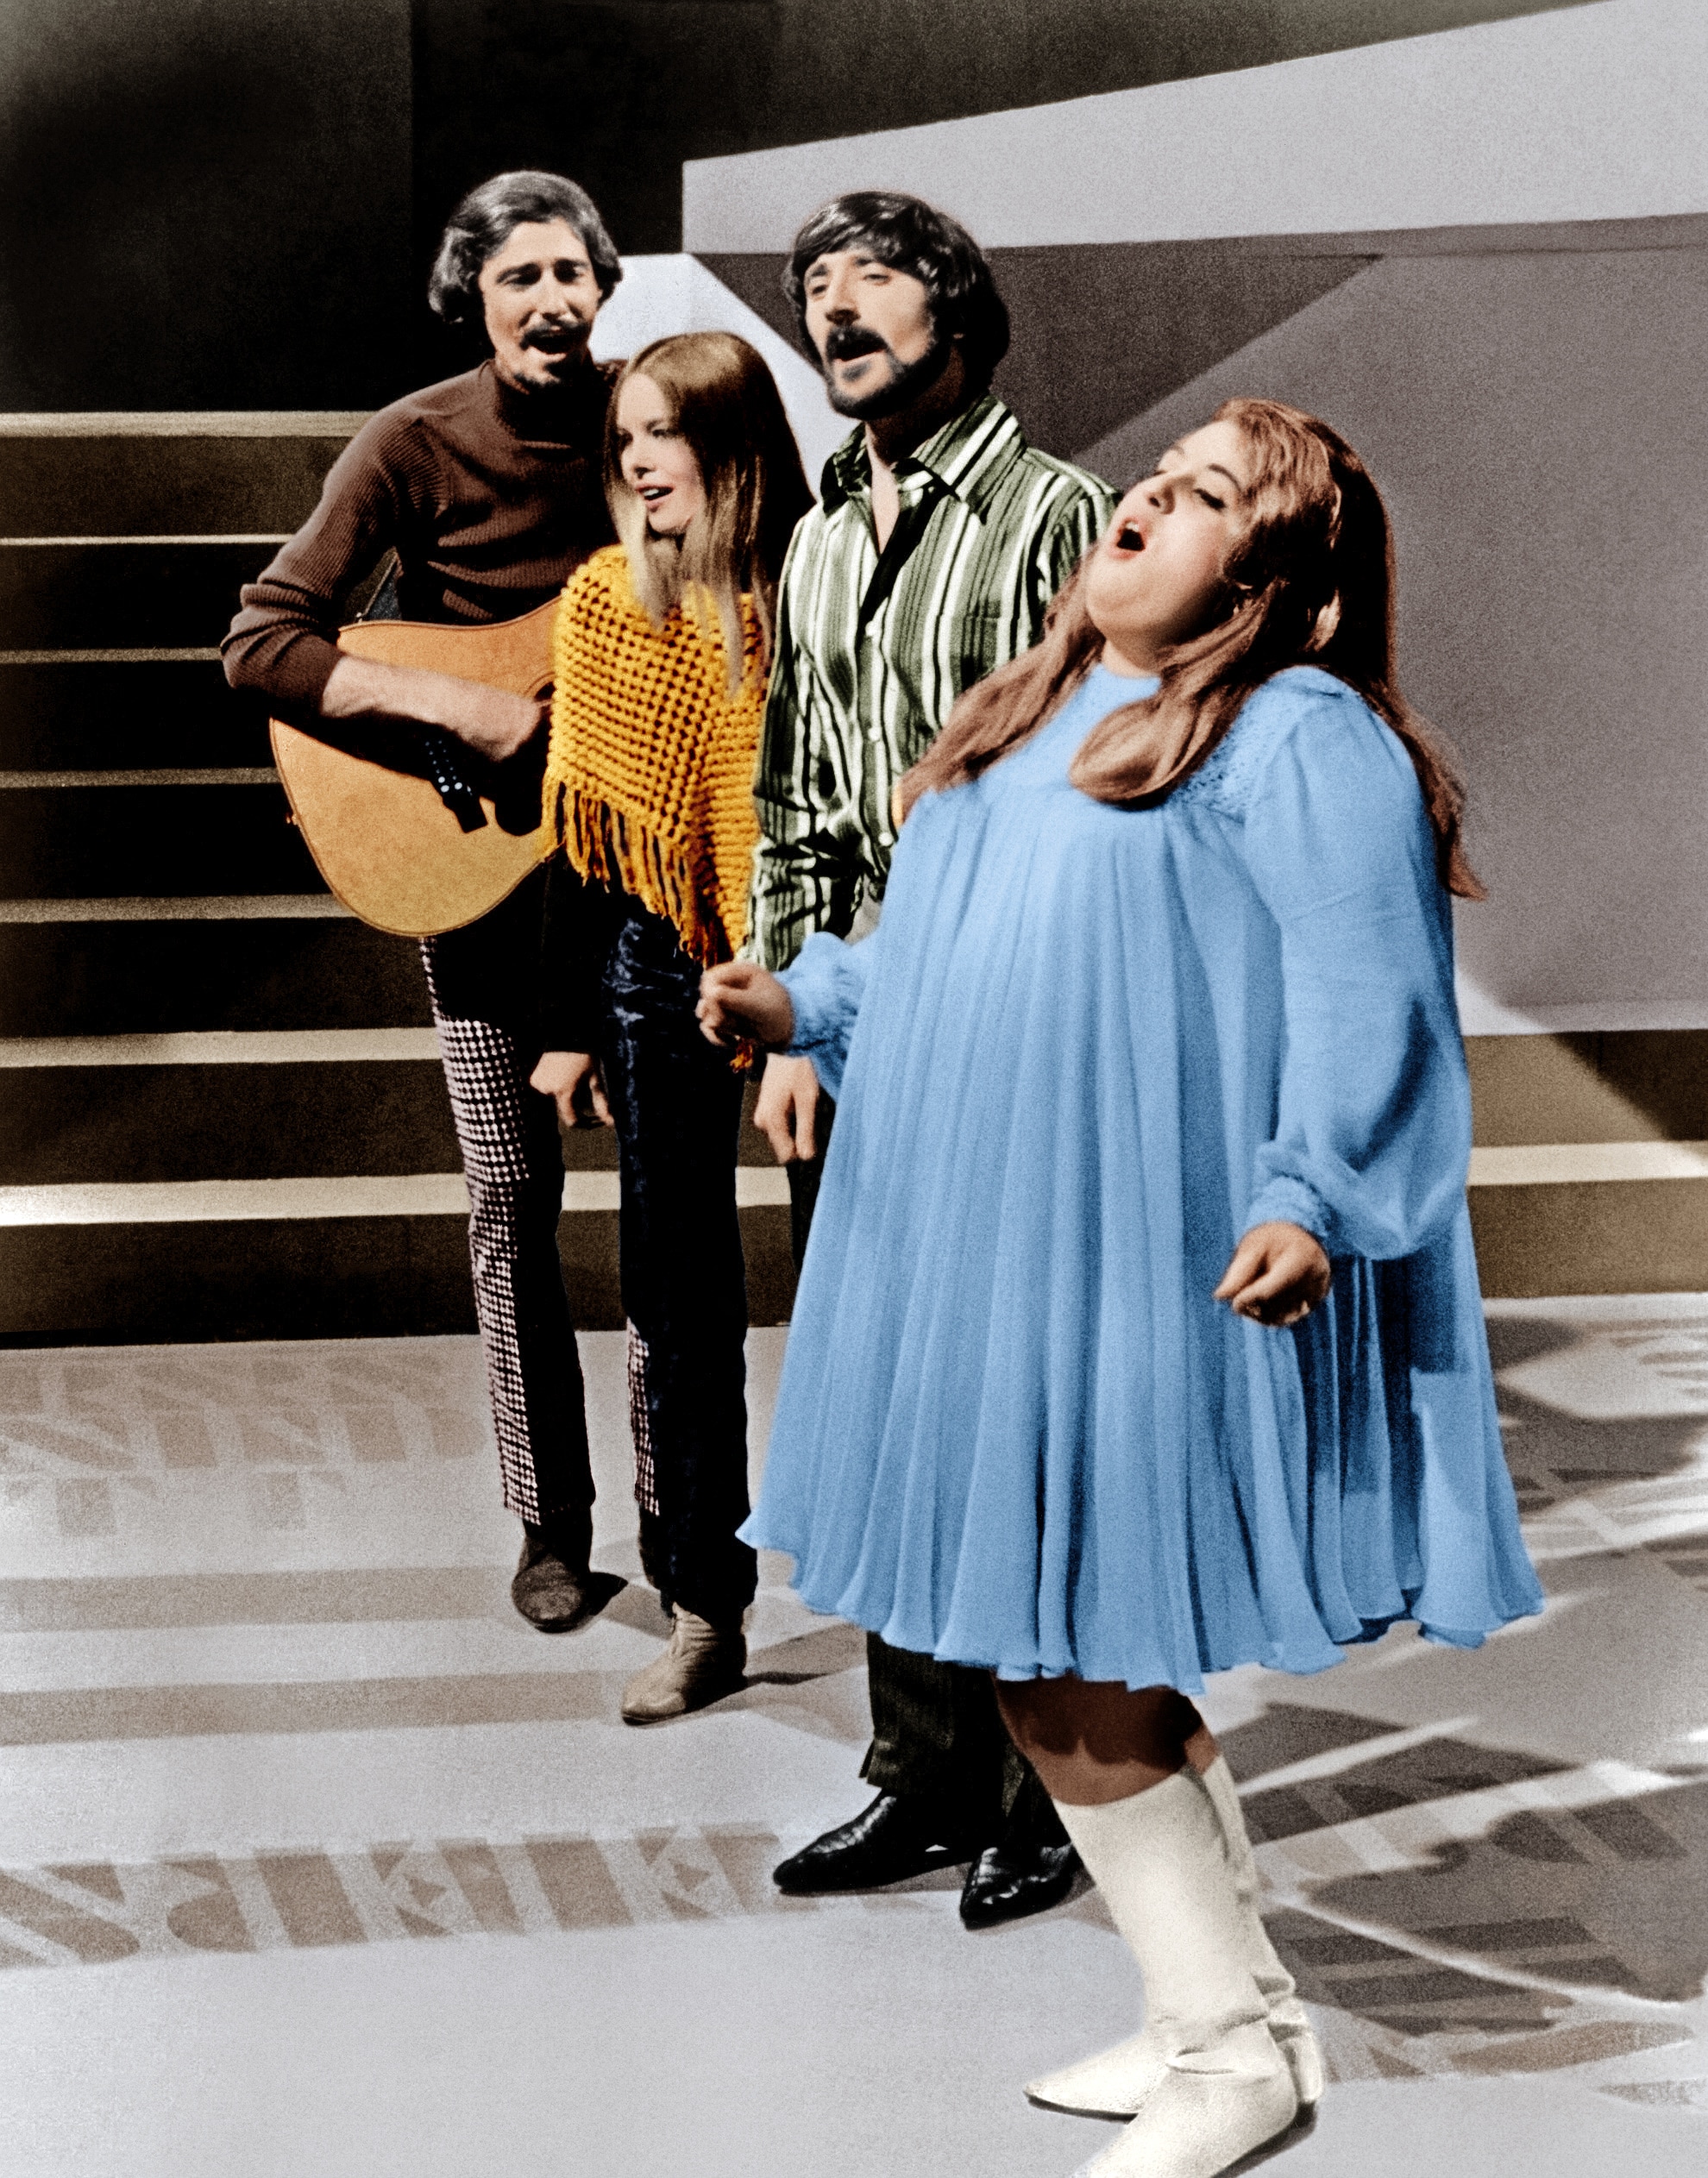 The Mamas and The Papas (from left: John Phillips, Michelle Phillips, Denny Doherty, Cass Elliot aka Mama Cass), performing on an unknown television show, ca. 1966